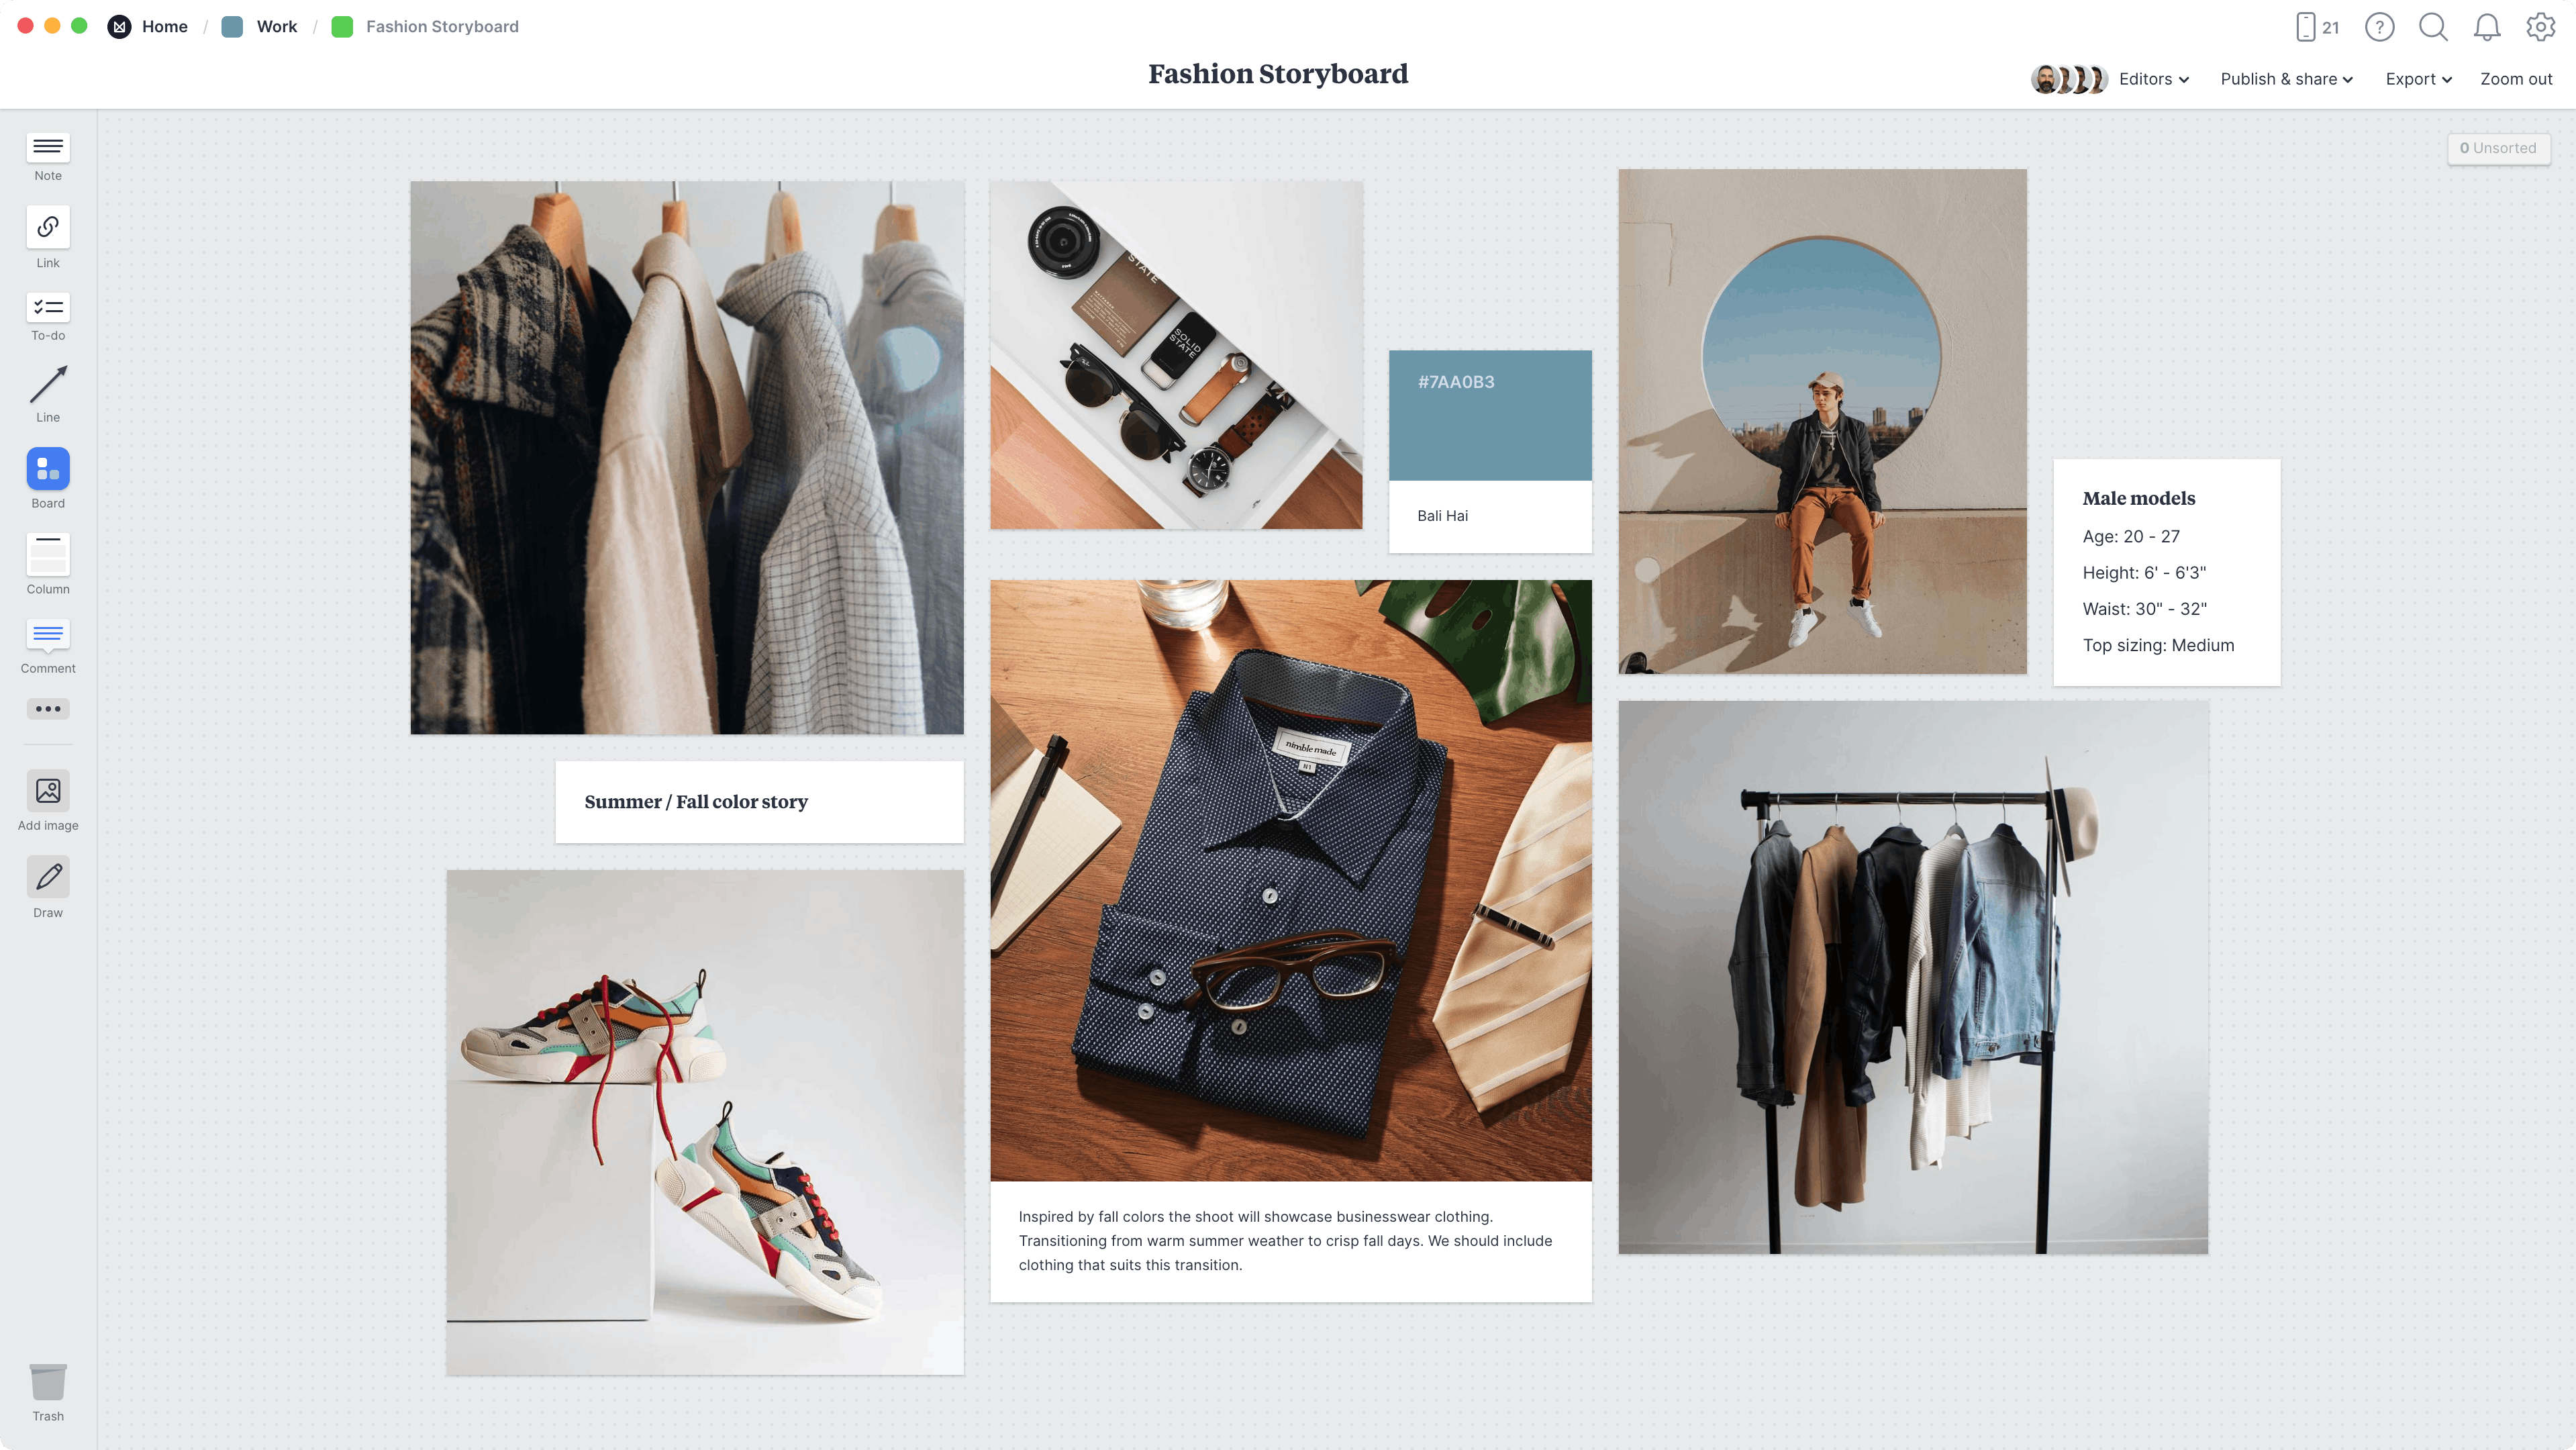 Fashion Storyboard Template, within the Milanote app